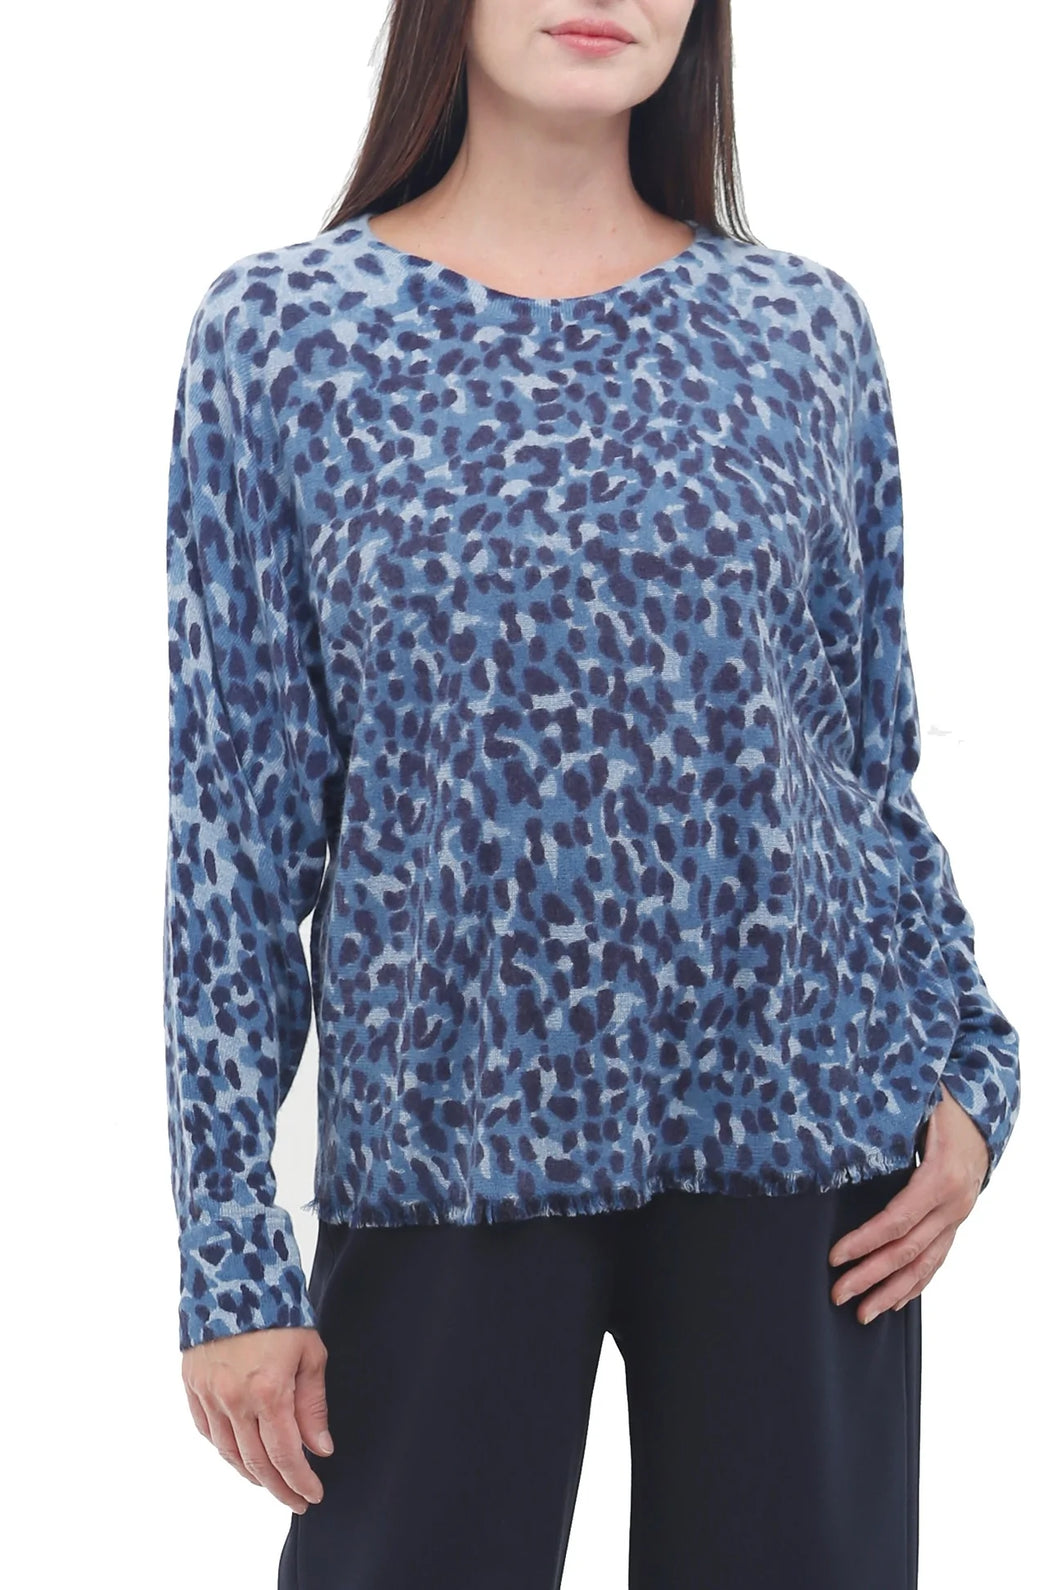 100% Cashmere Ombre Animal Print Pullover